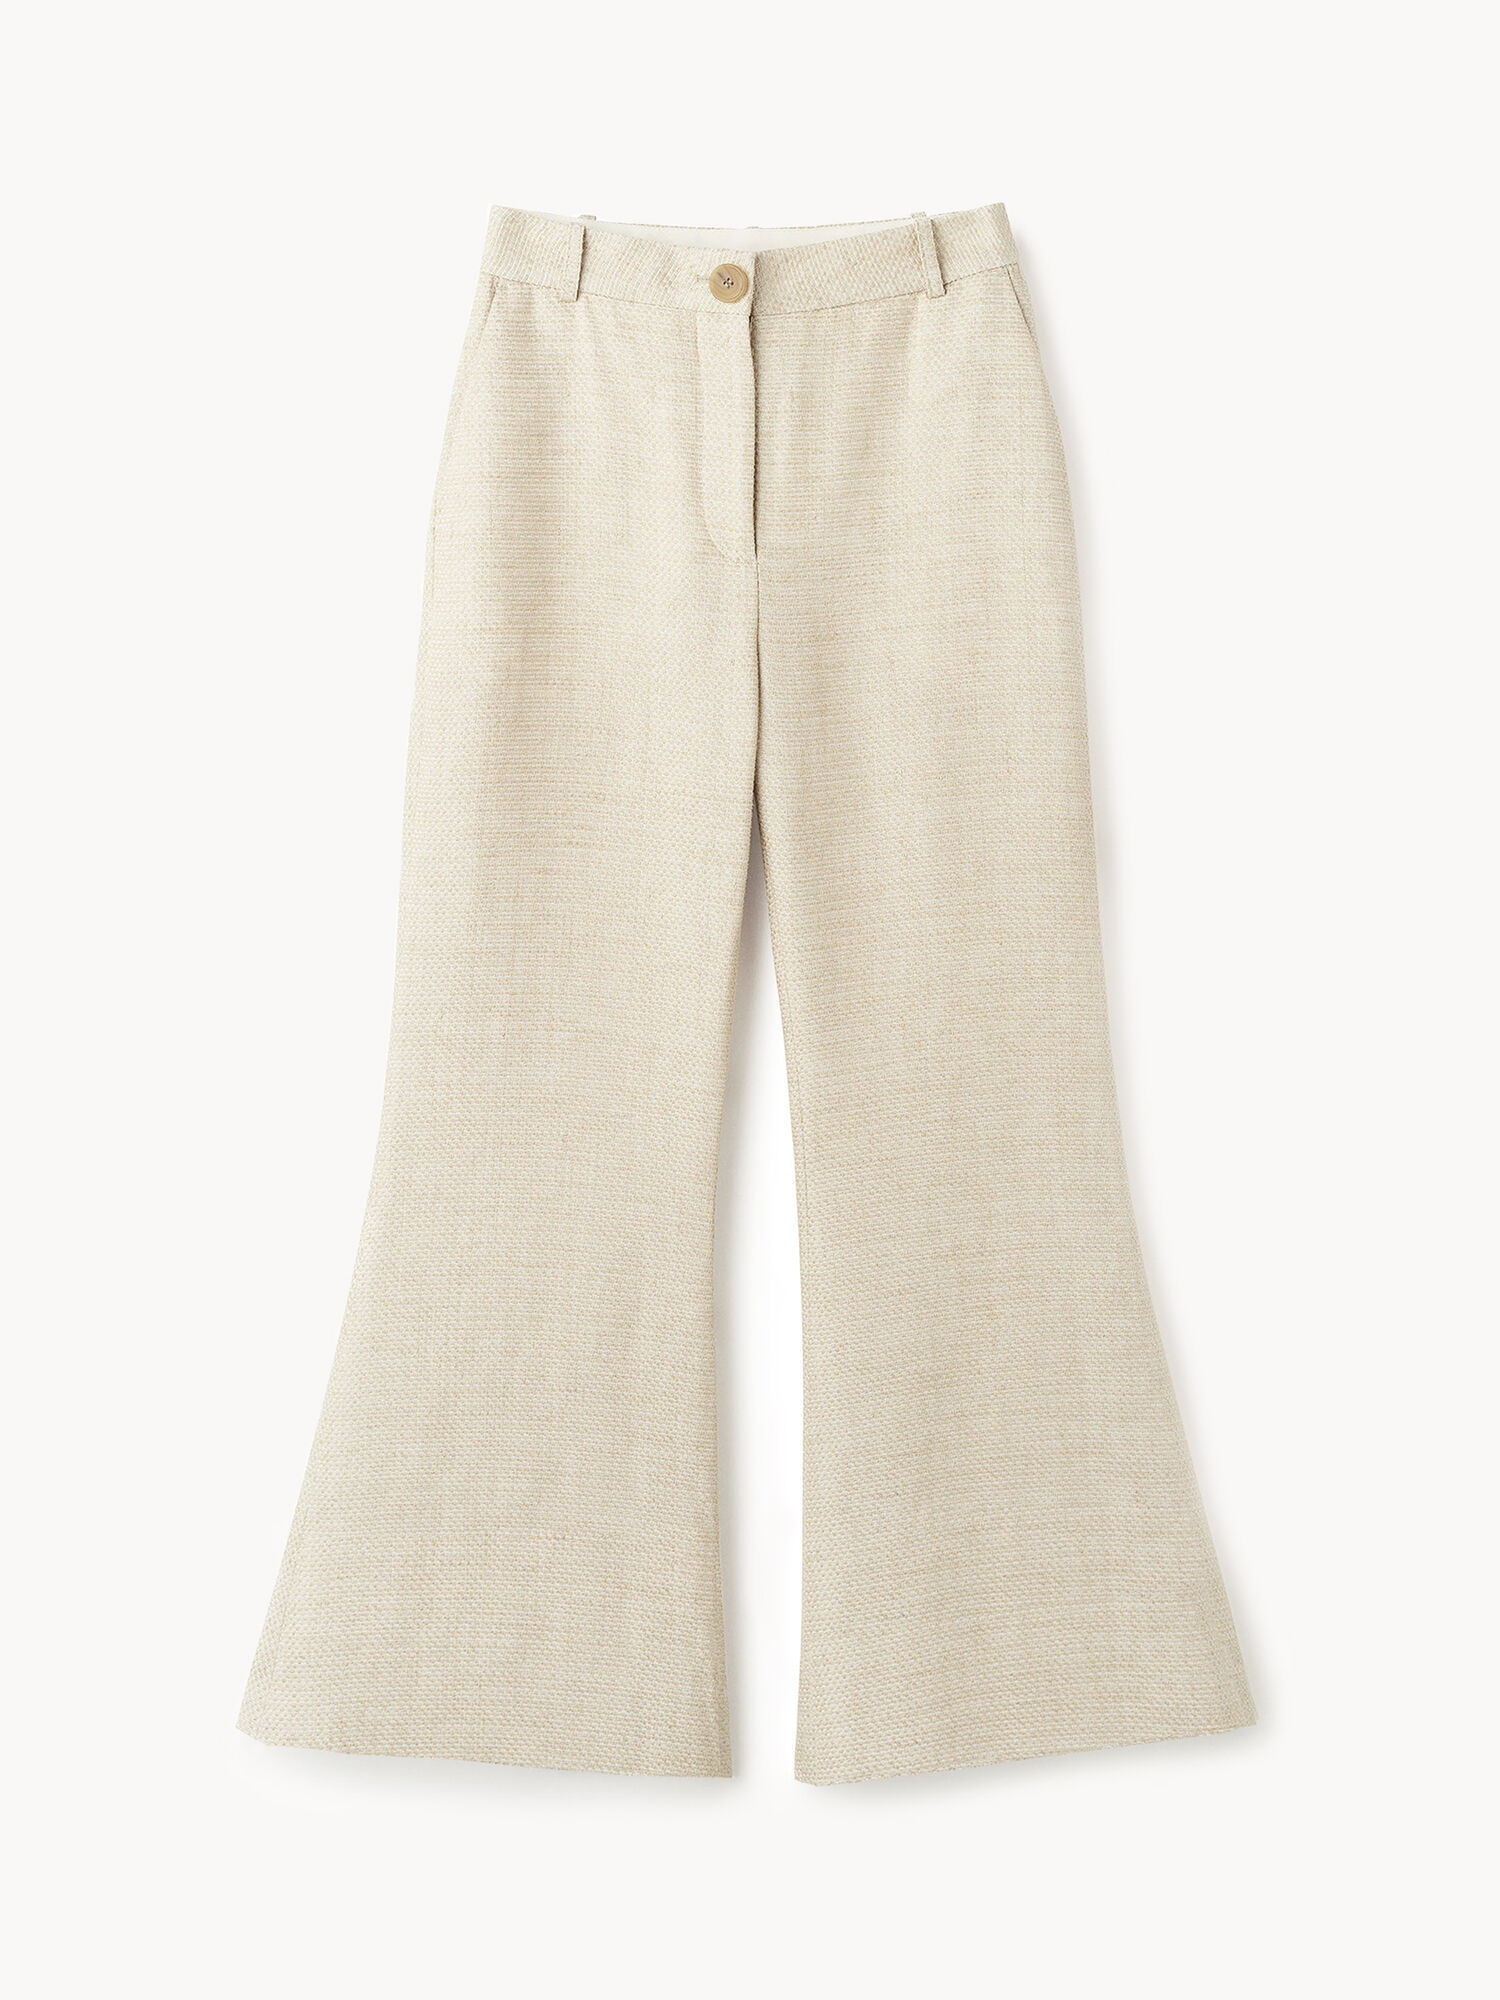 Caras flared trousers - Buy Trousers online